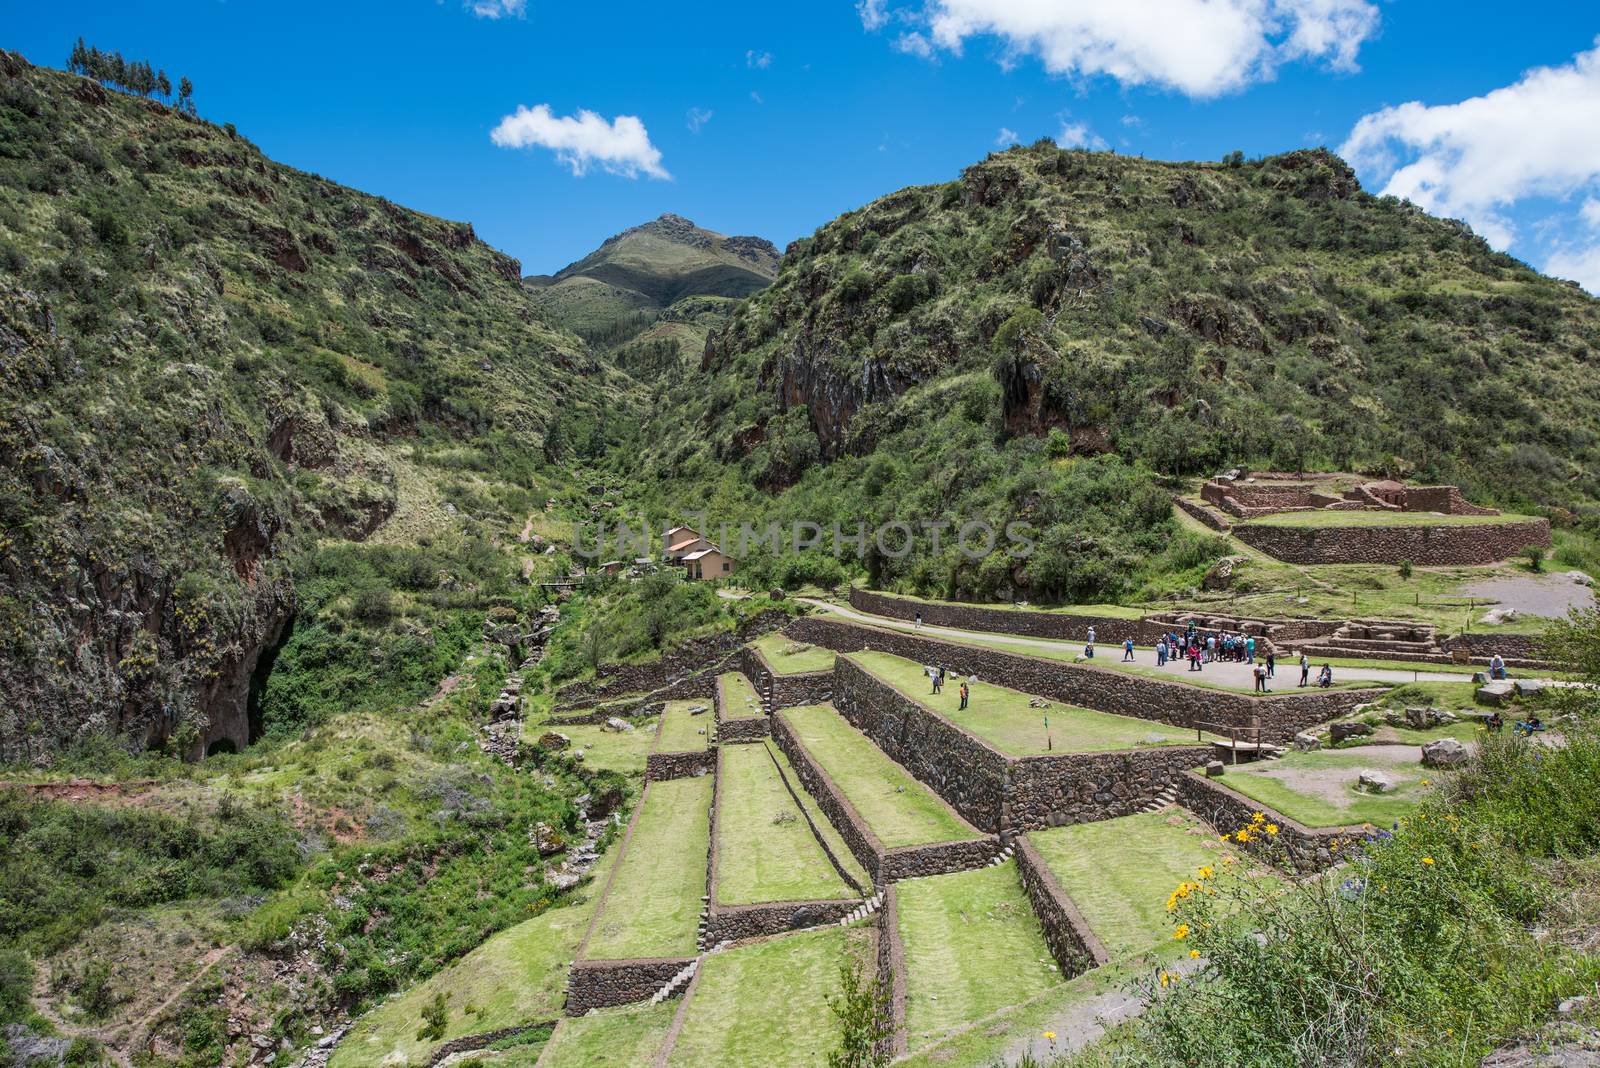 The Sacred Valley and the Inca ruins of Pisac, near Cuzco Peru. by rayints